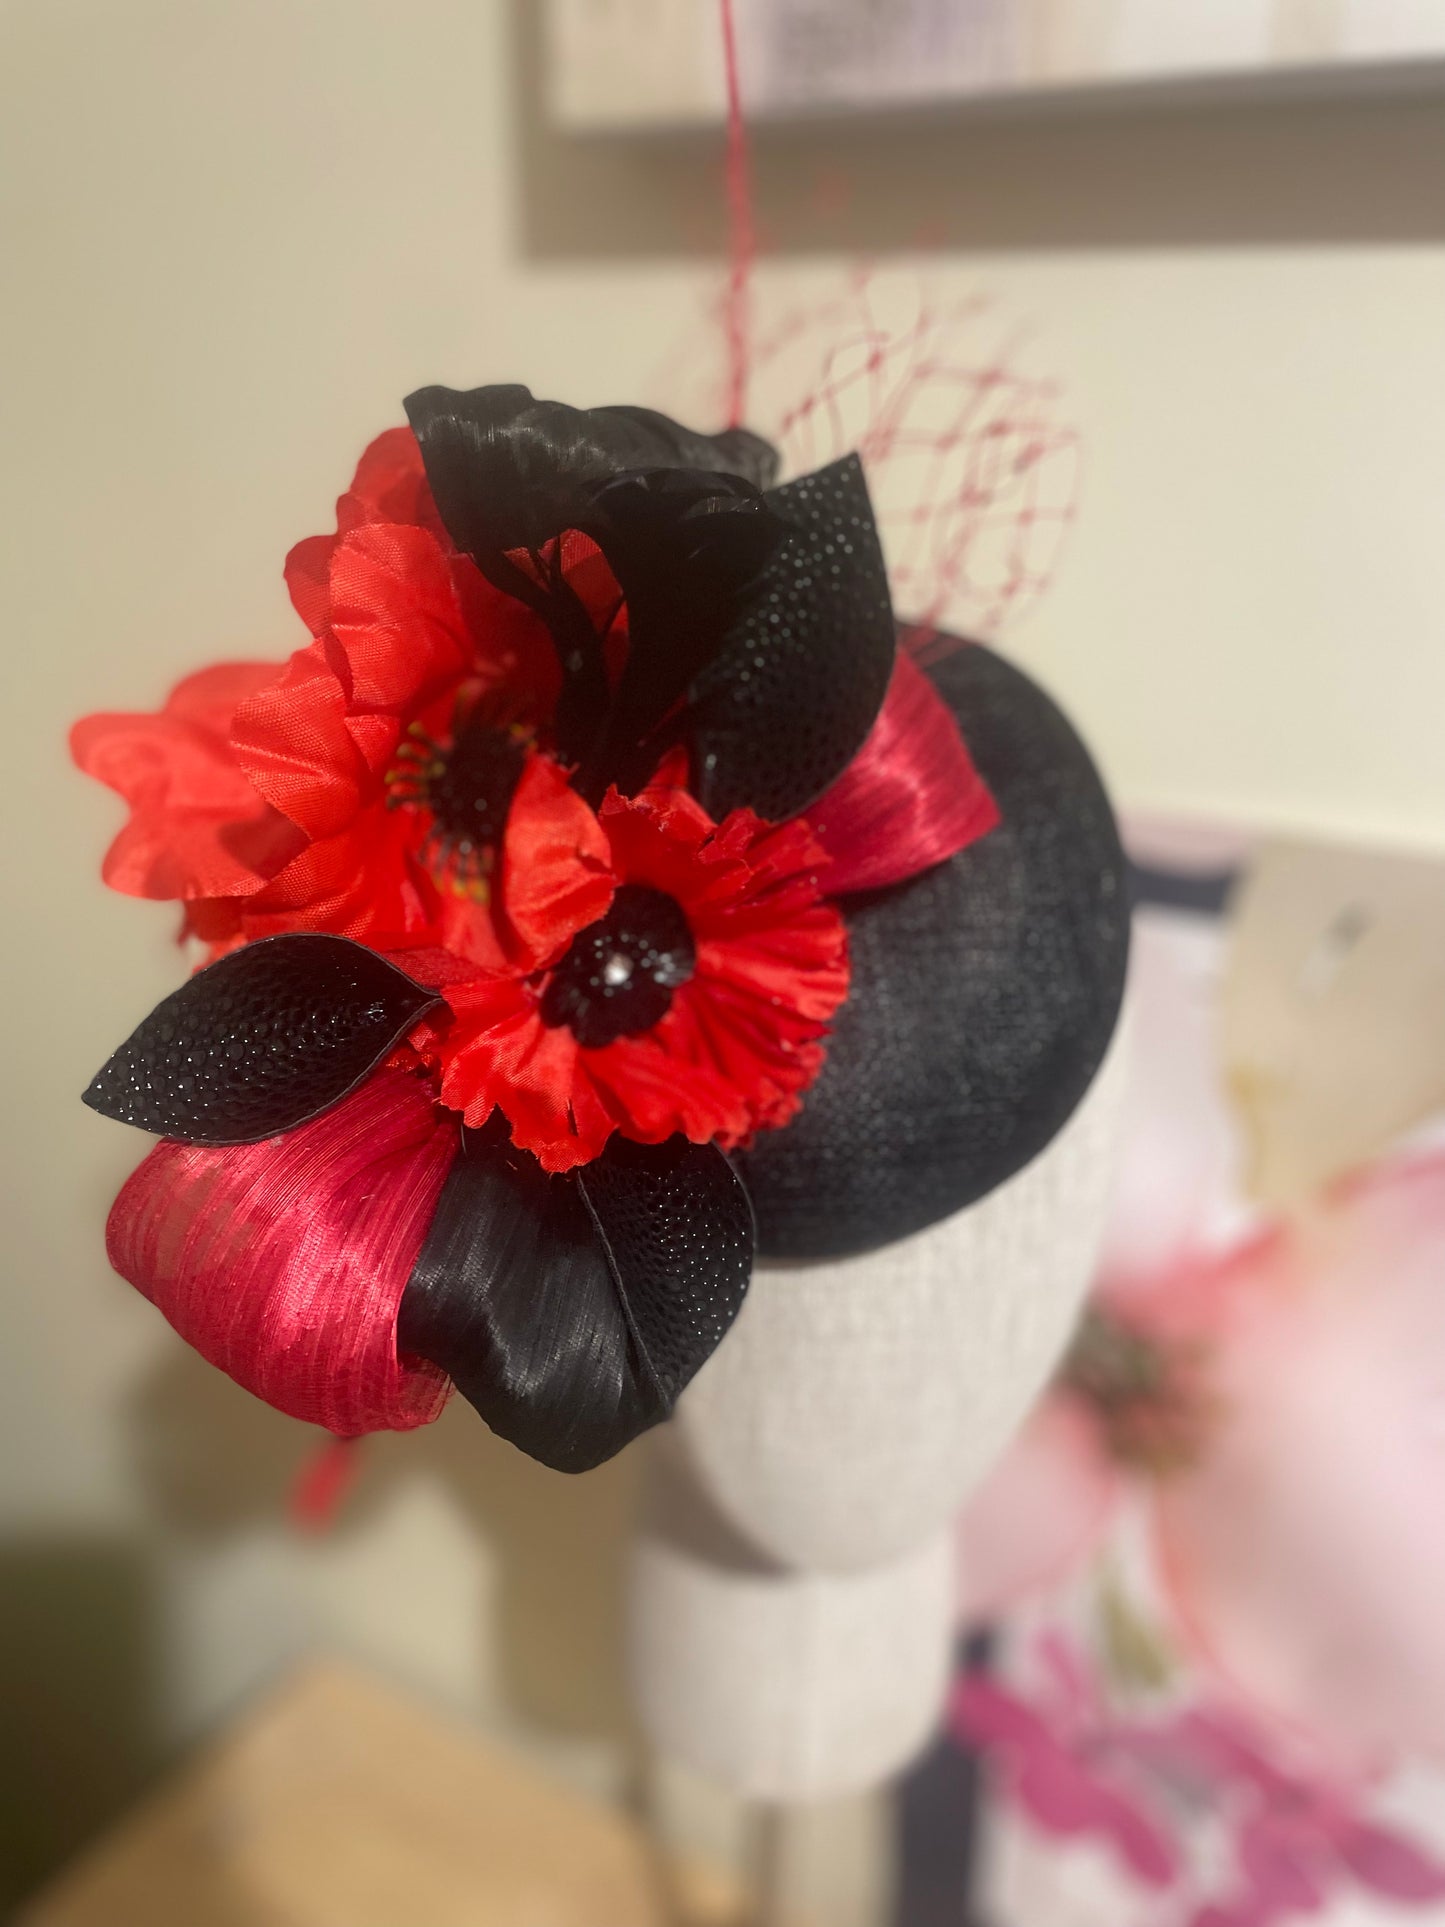 Red and black poppy